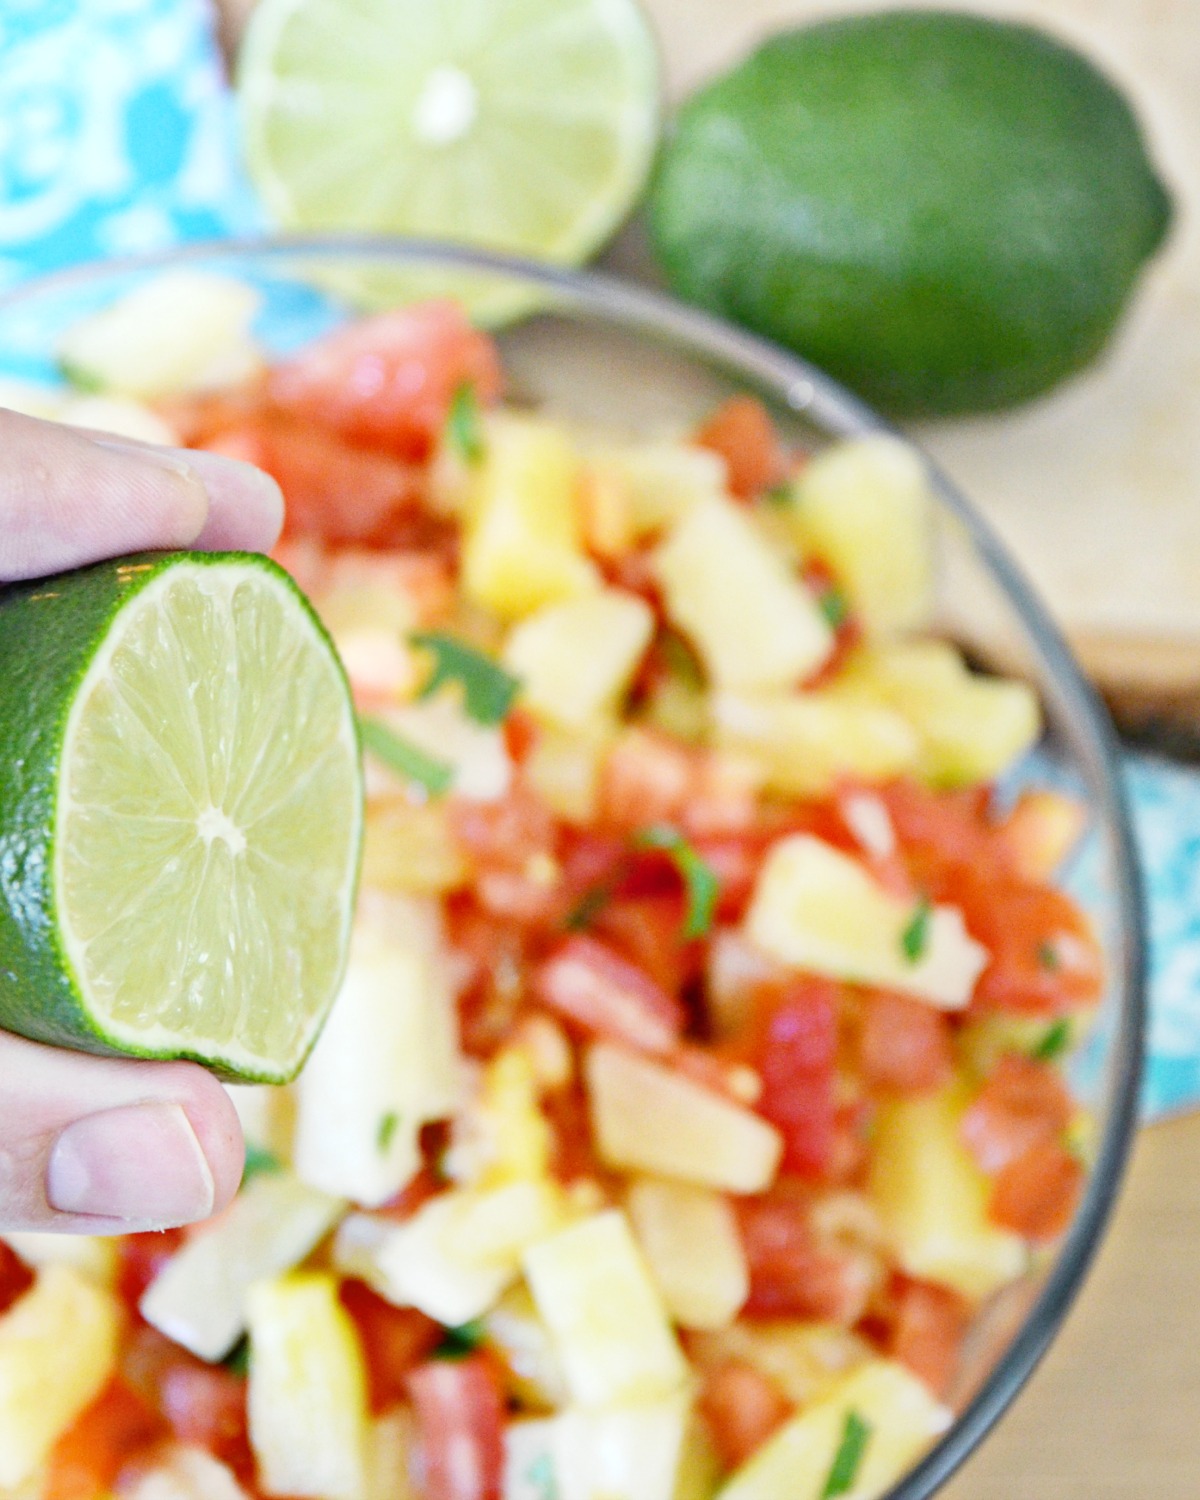 Freshly squeezed lime is great on this easy pineapple salsa recipe.